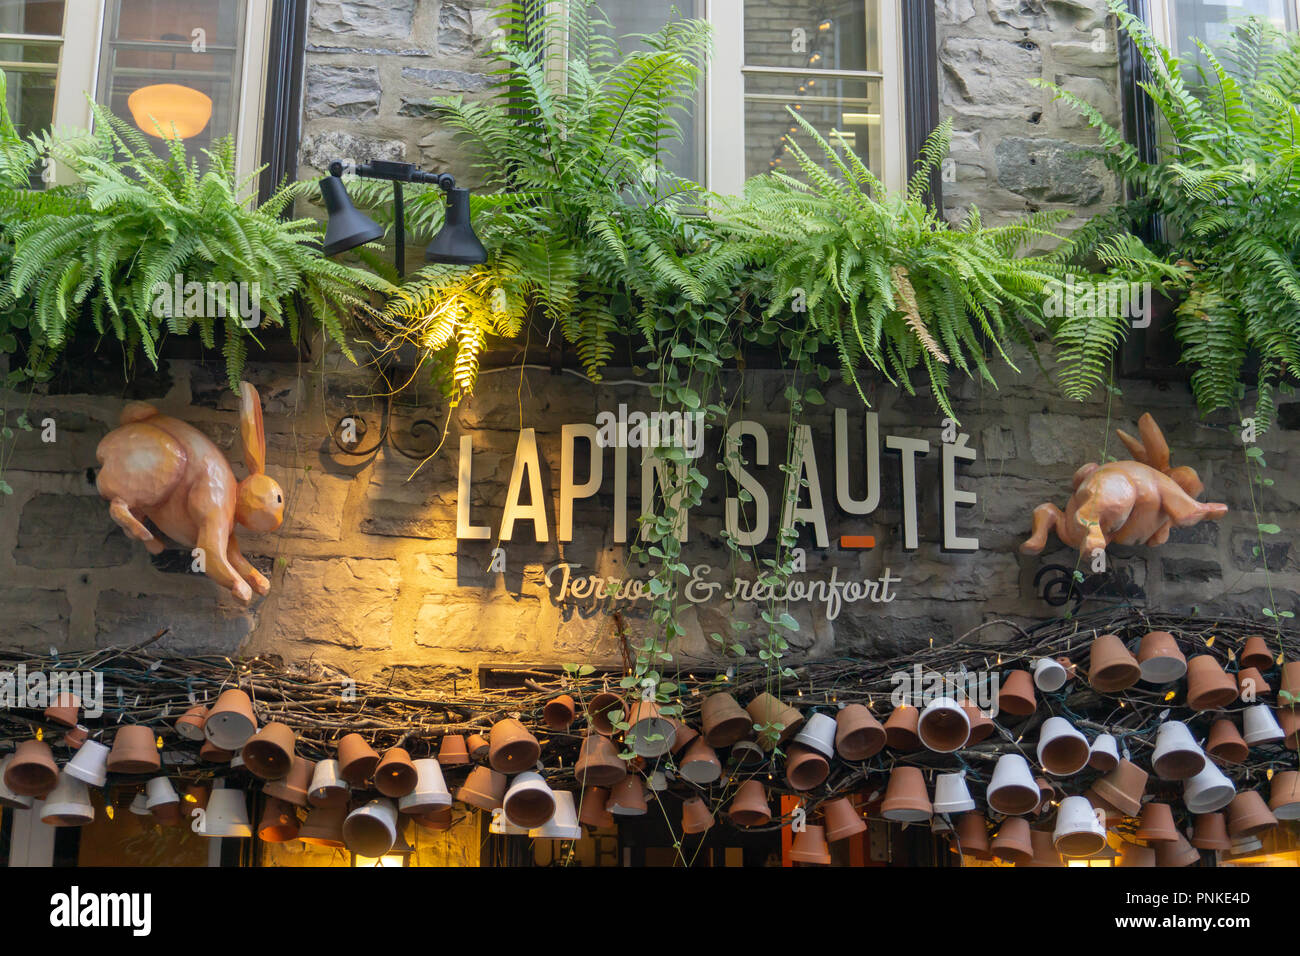 Bunnies, pots and ferns advertising Lapin Saute Stock Photo